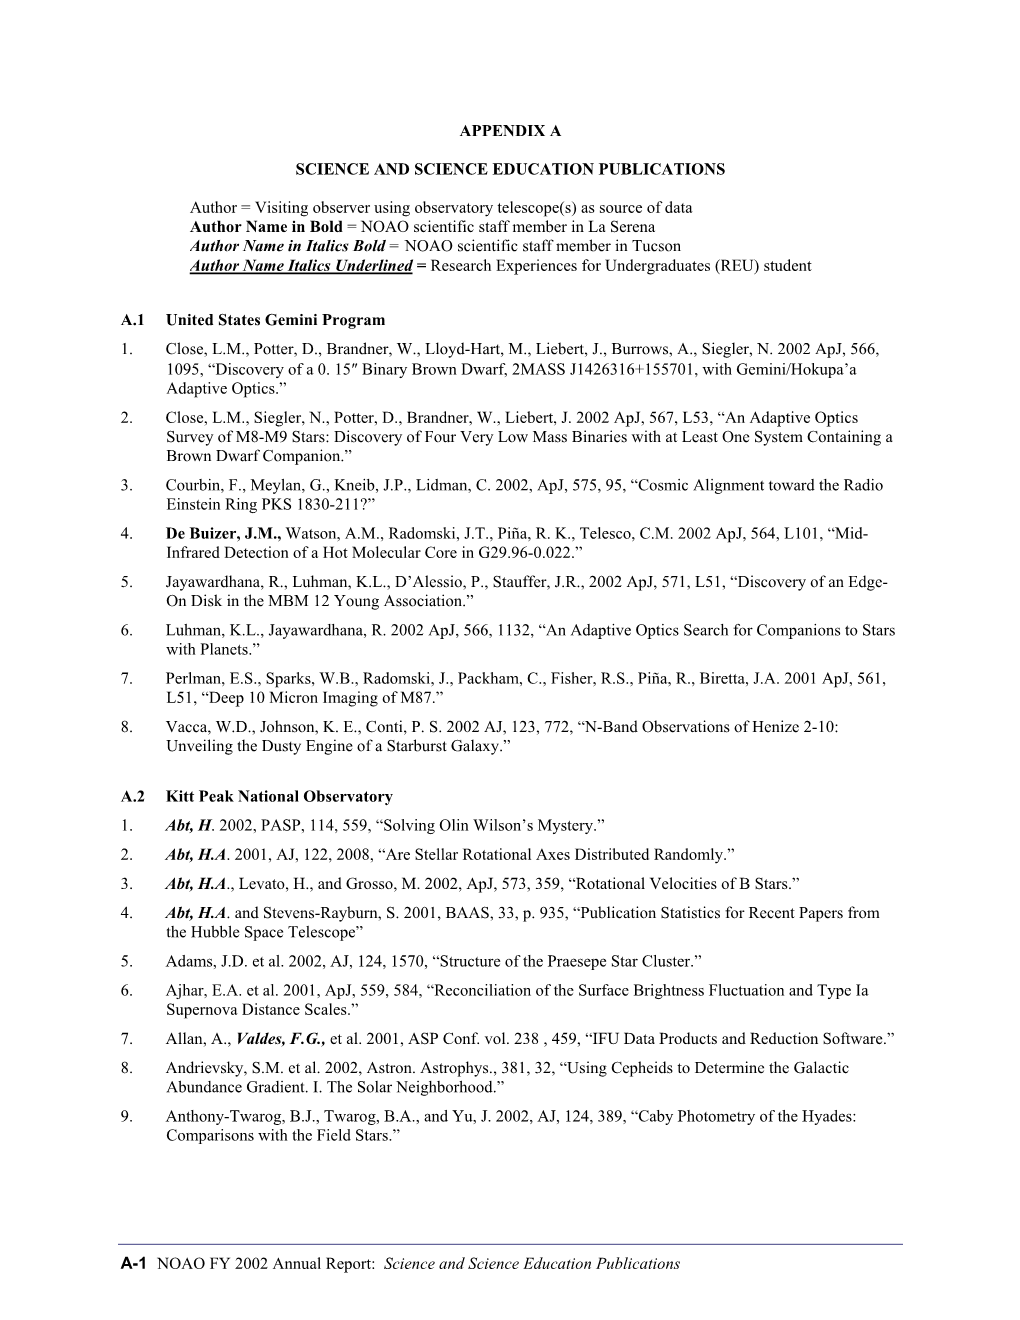 A-1 NOAO FY 2002 Annual Report: Science and Science Education Publications 10